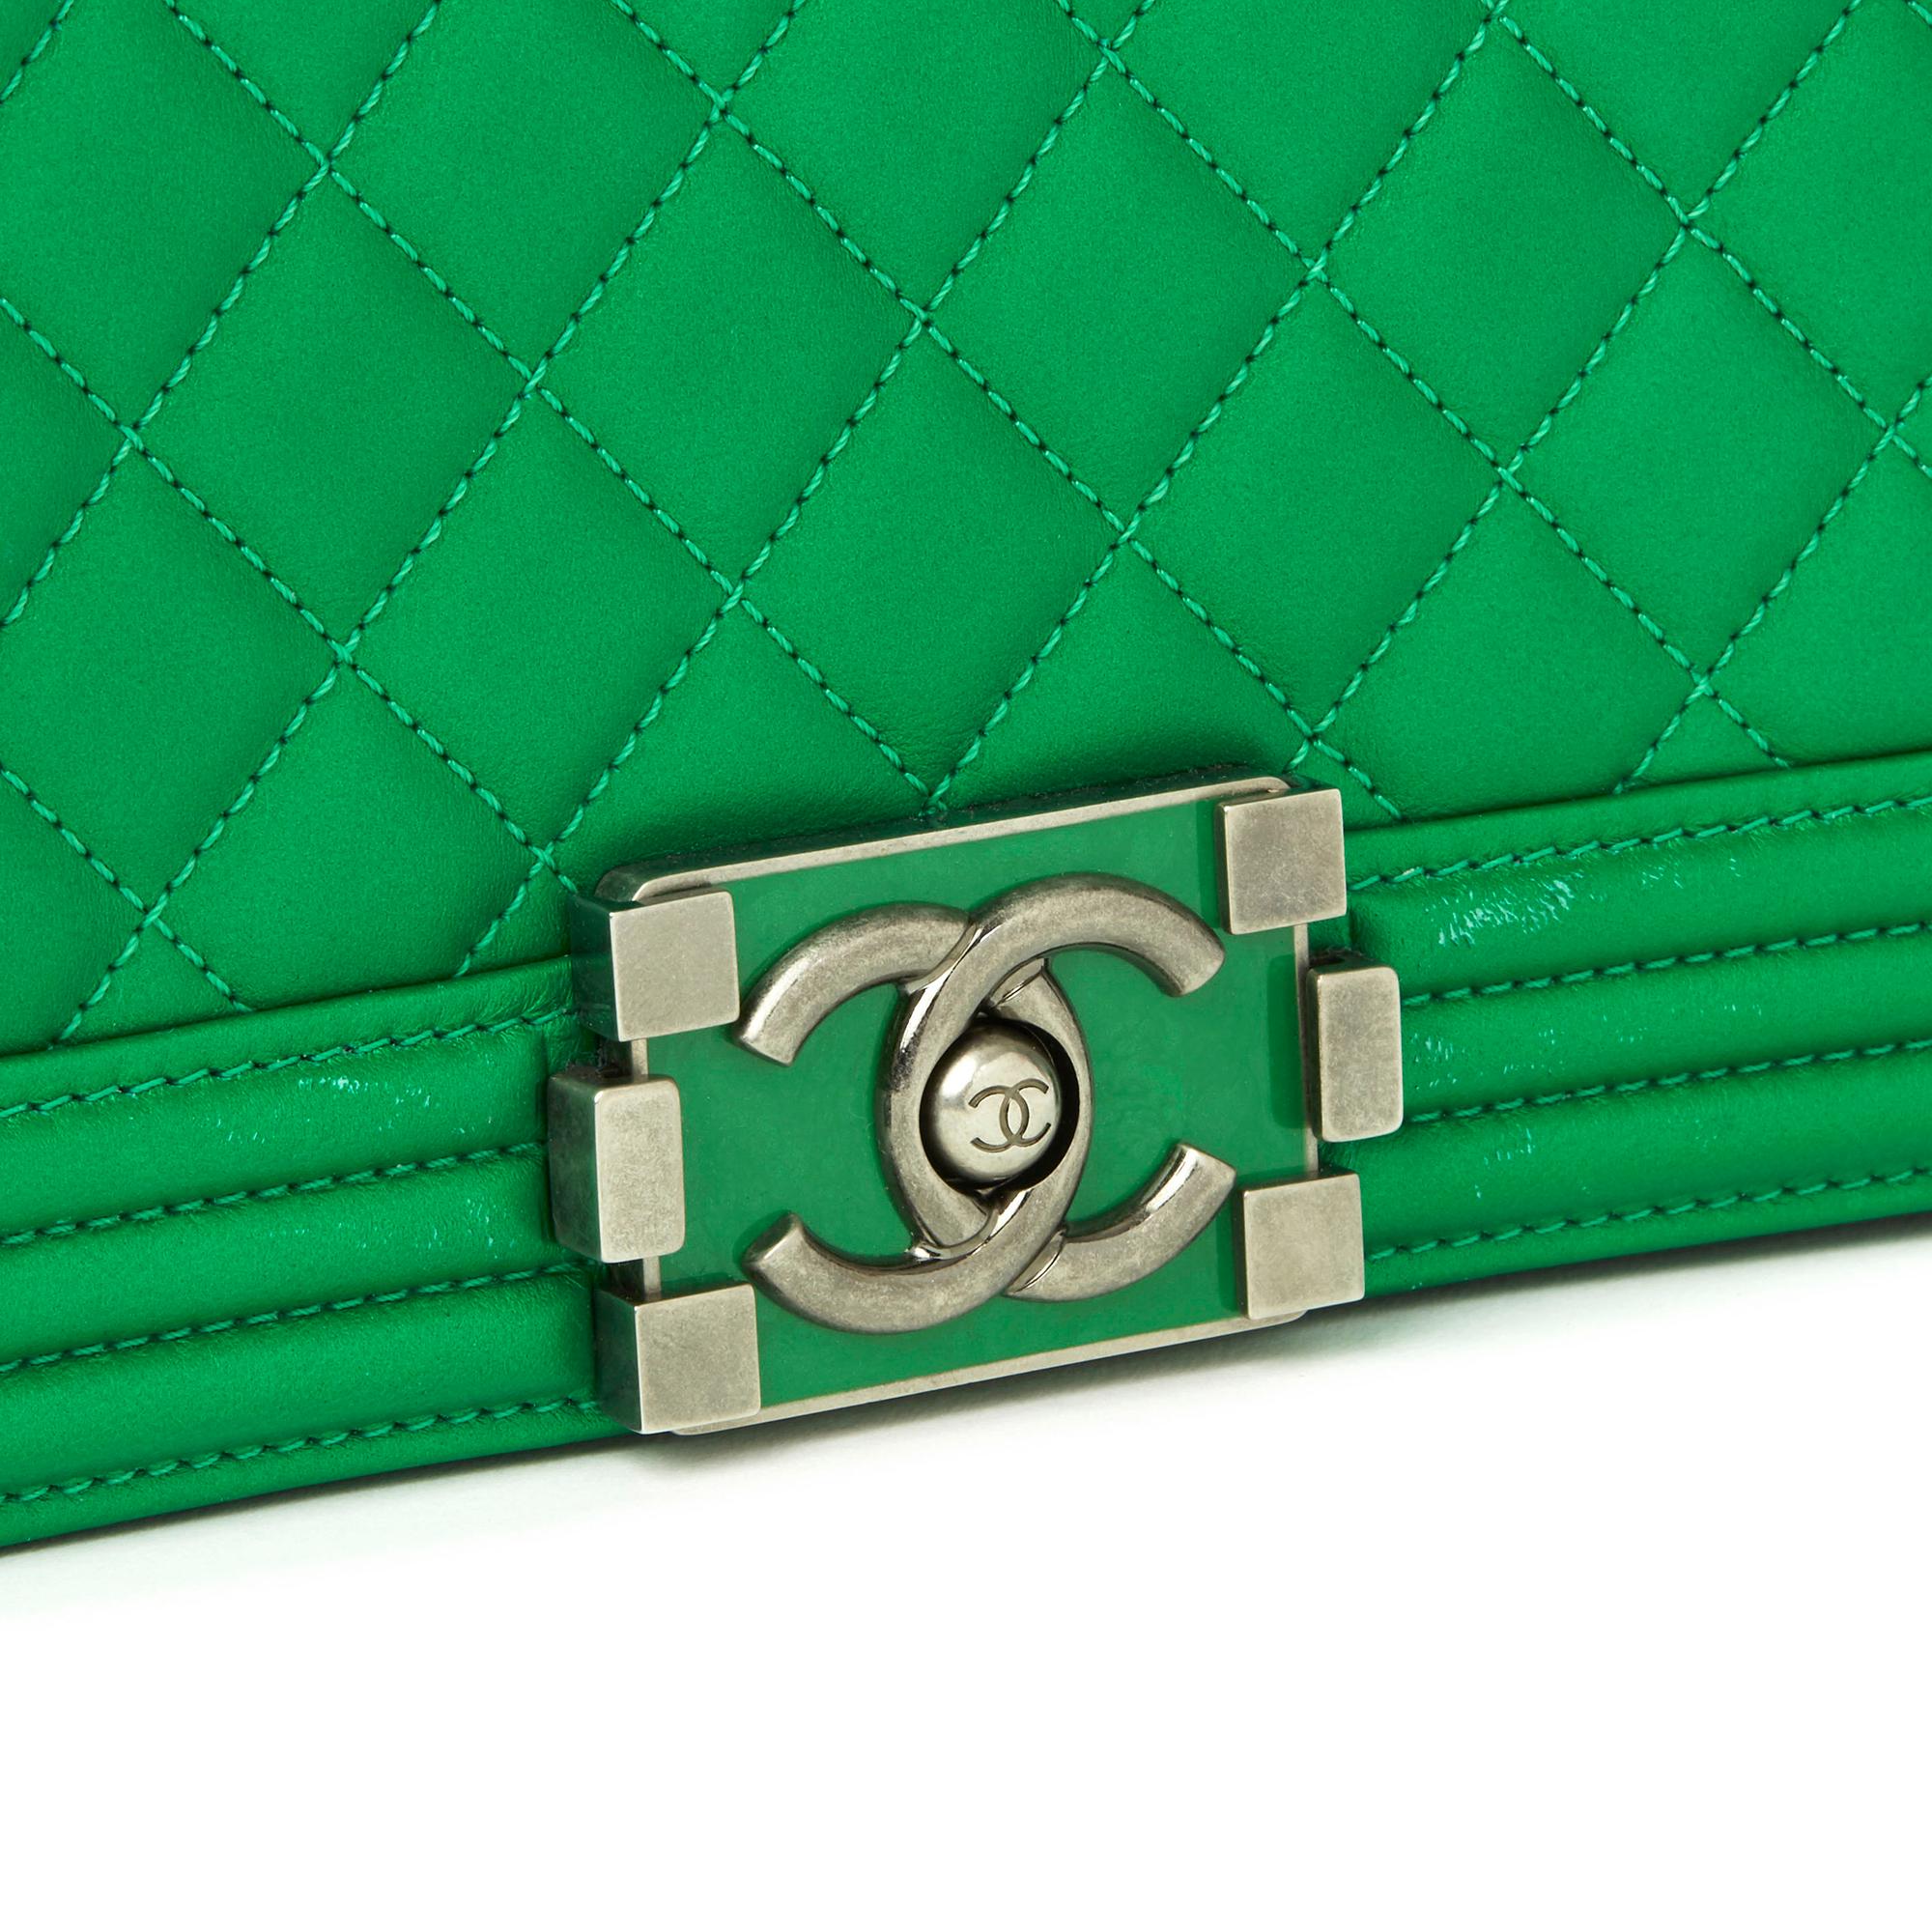 2015 Chanel Green Quilted Metallic Lambskin Leather New Medium Le Boy 2